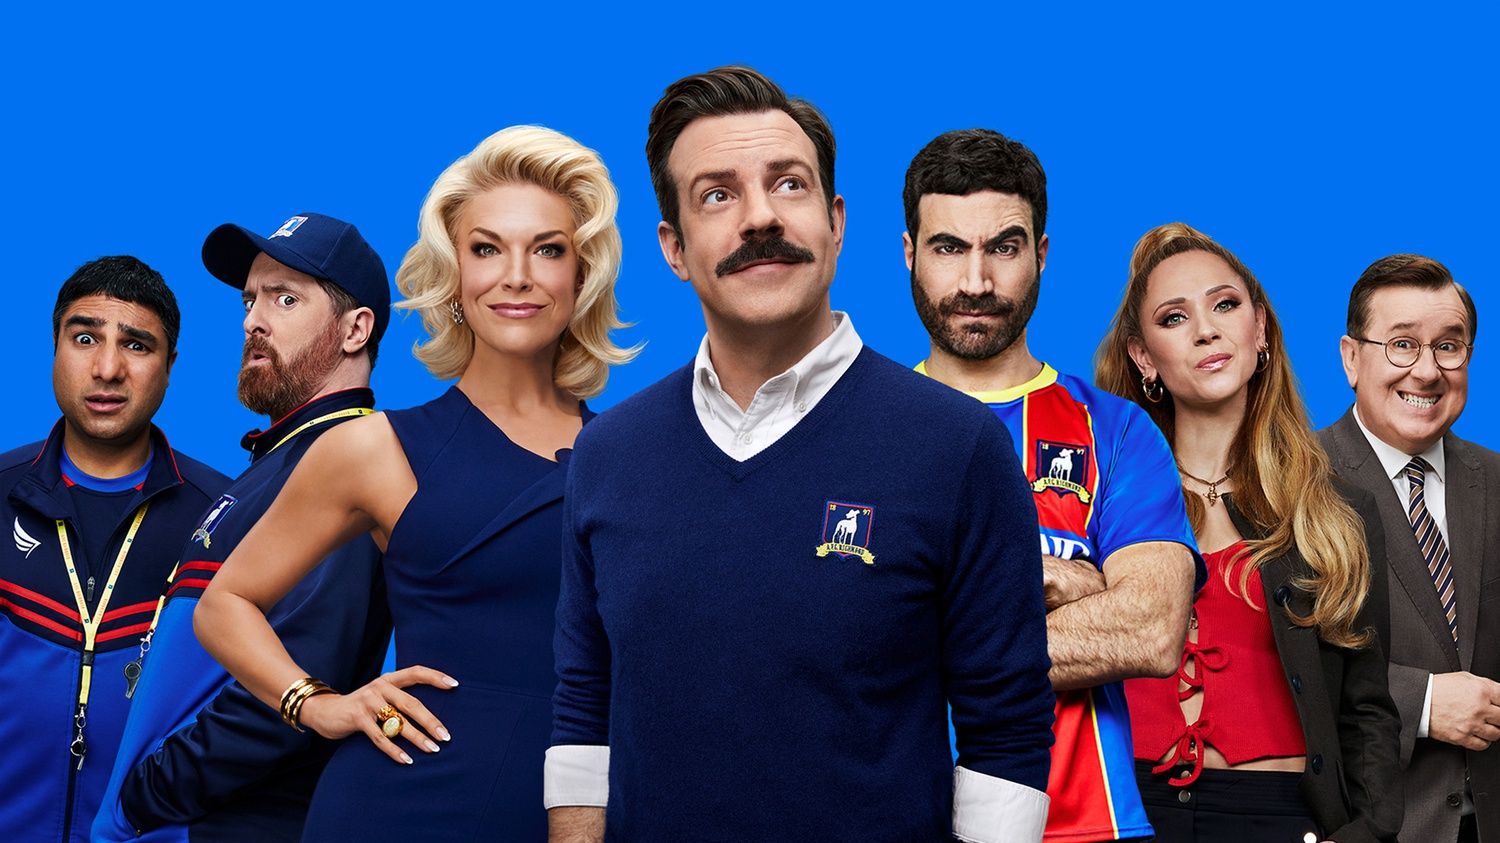 Jason Sudeikis and the full cast of Ted Lasso poses for the camera